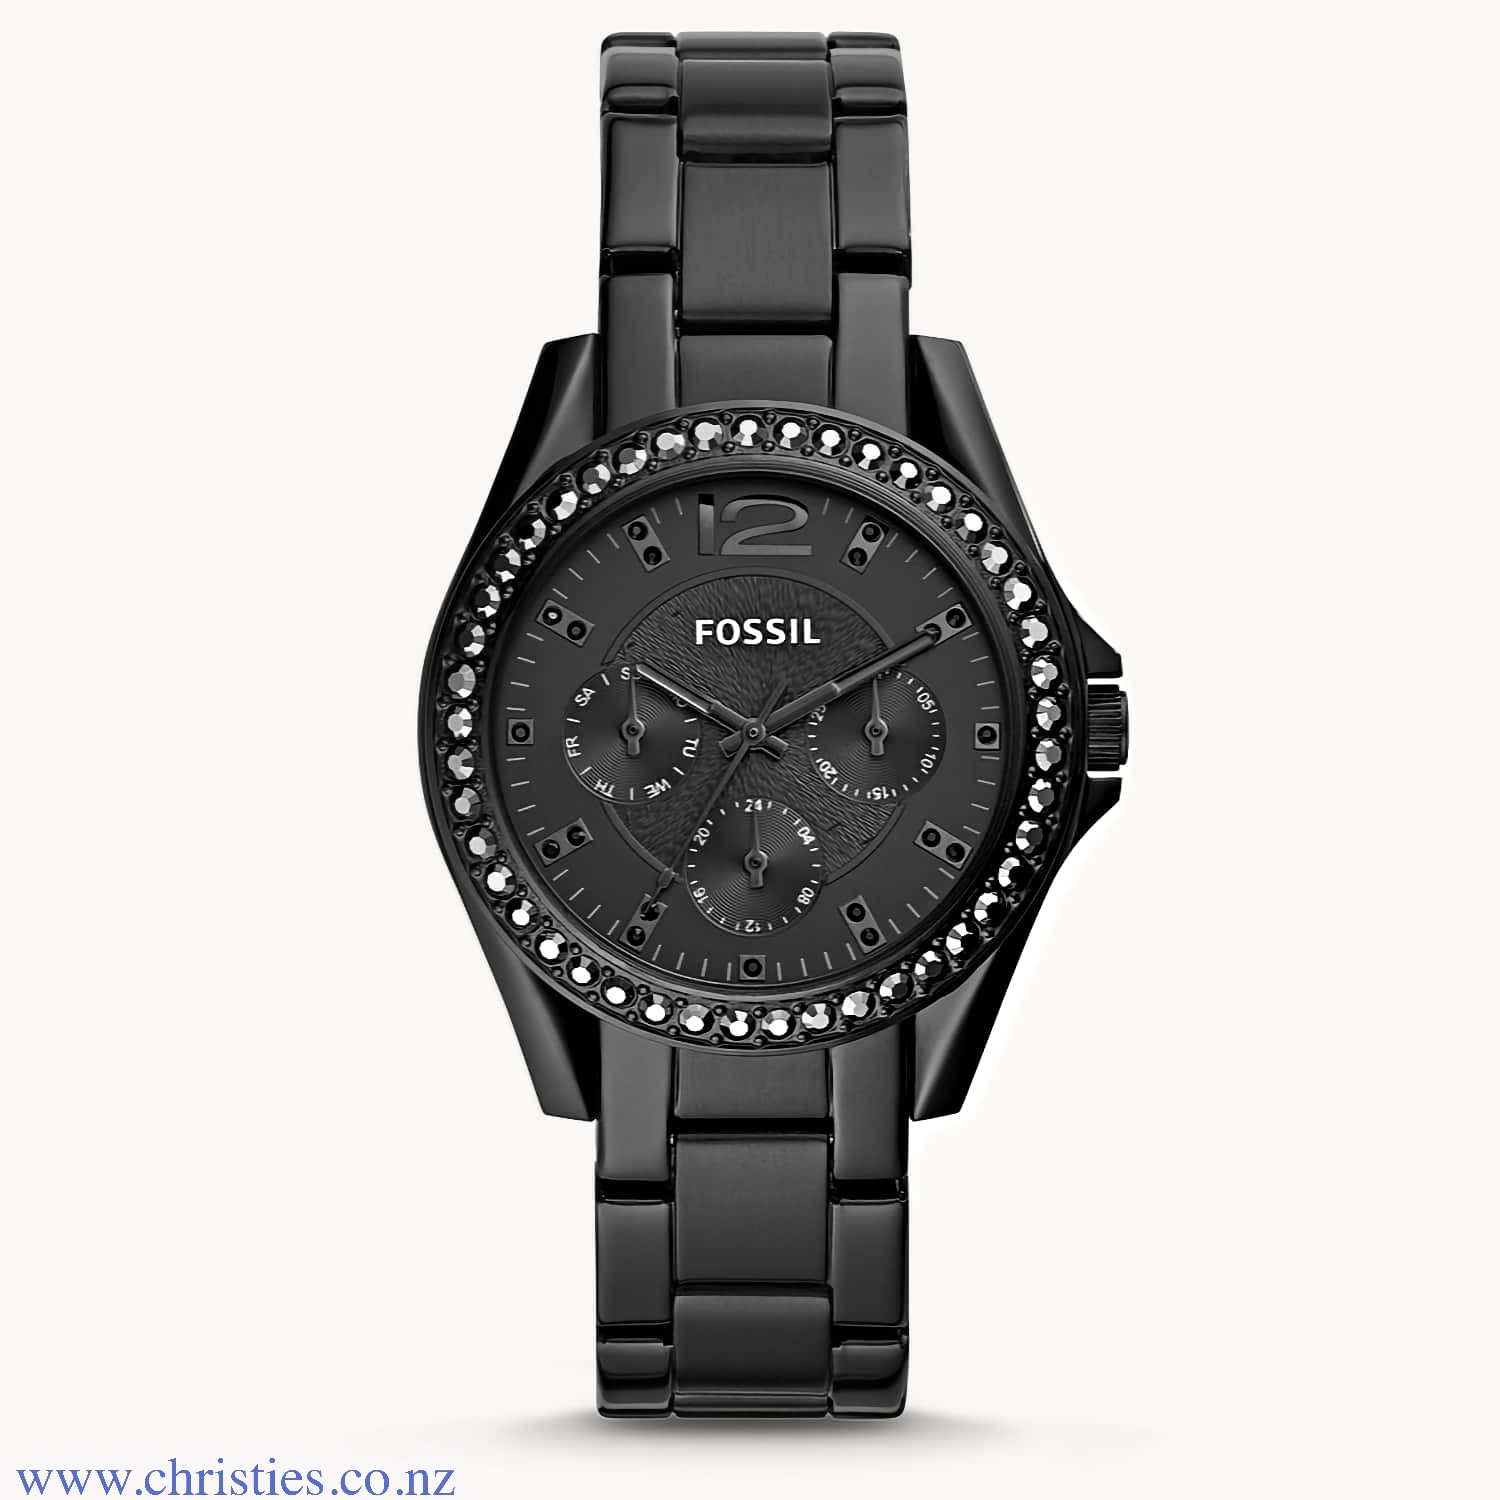 ES4519 Fossil Riley Multifunction Watch. ES4519 Fossil Riley Multifunction Watch with 50 metre water resist rating Afterpay - Split your purchase into 4 instalments - Pay for your purchase over 4 instalments, due every two weeks. You’ll pay your first whe